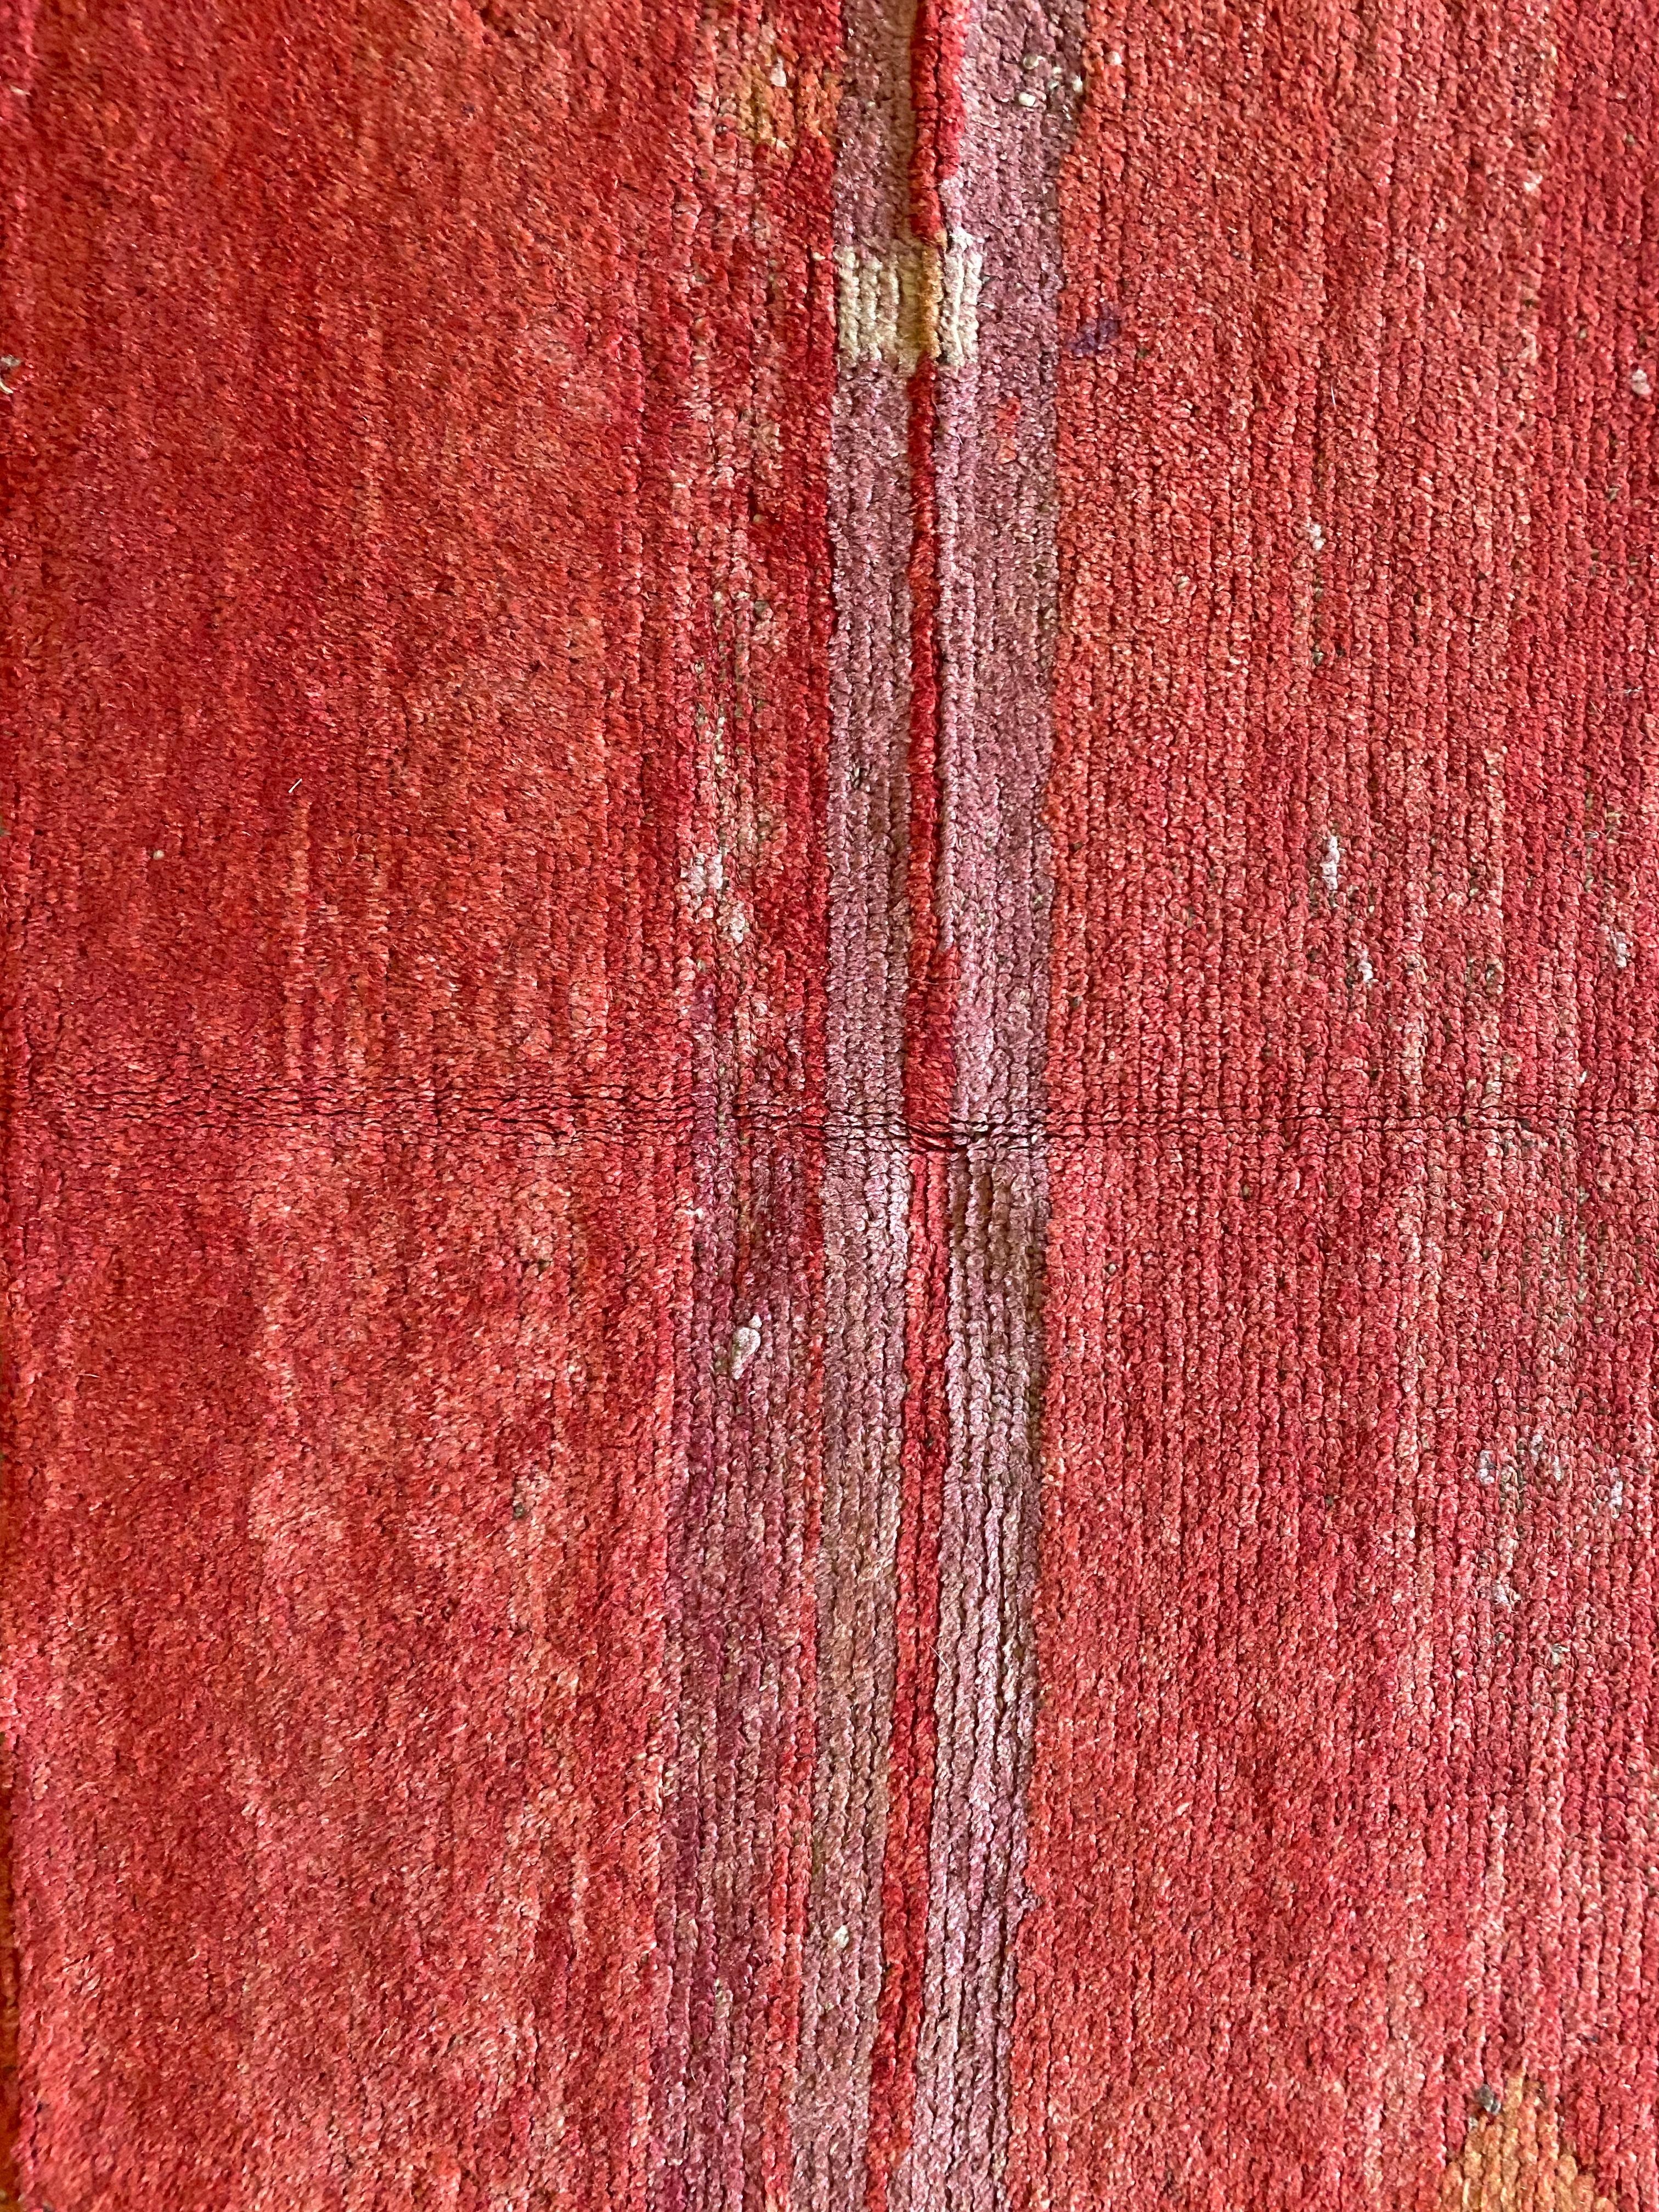 Antique Red Wangden Rug from Tibet, Naturally Dyed Wool For Sale 1